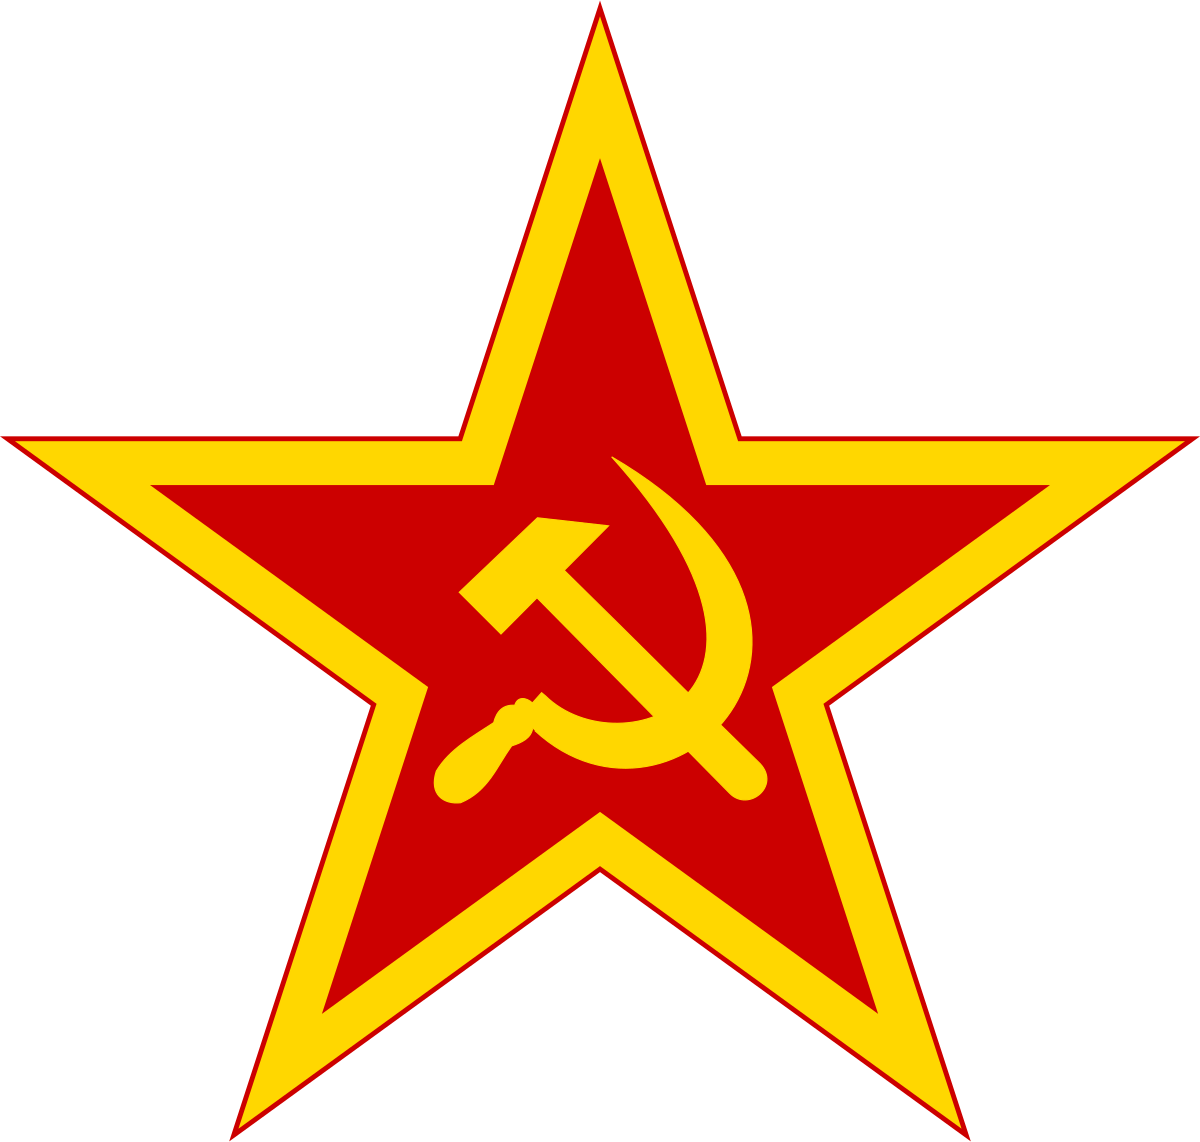 Red and Gold with Yellow Outline Logo - Communist symbolism